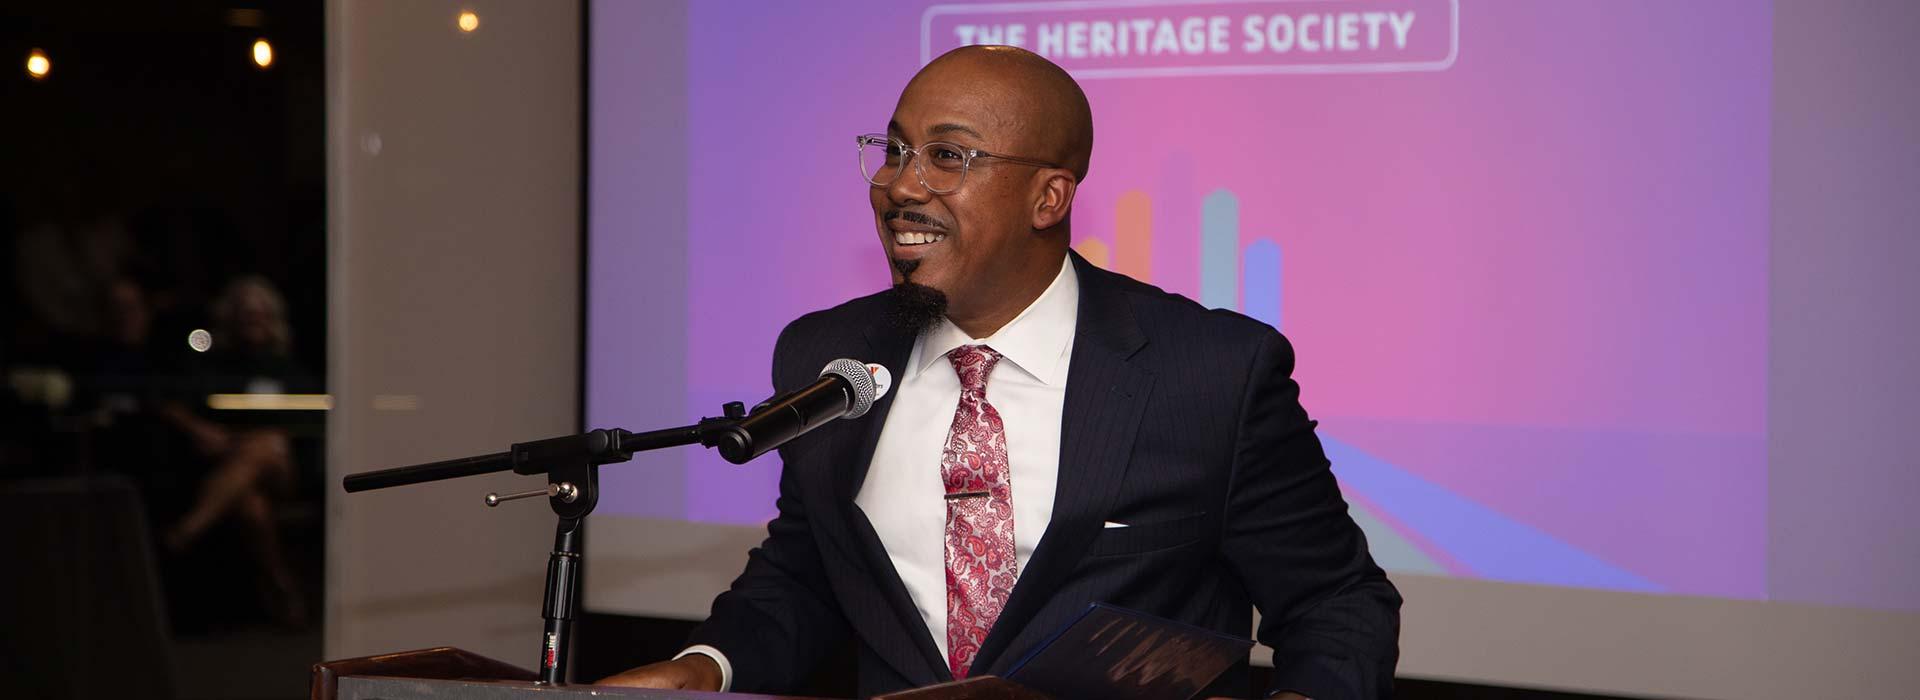 YMCA of South Hampton Roads President and CEO Anthony Walters speaks at the 2023 YMCA Heritage Society event